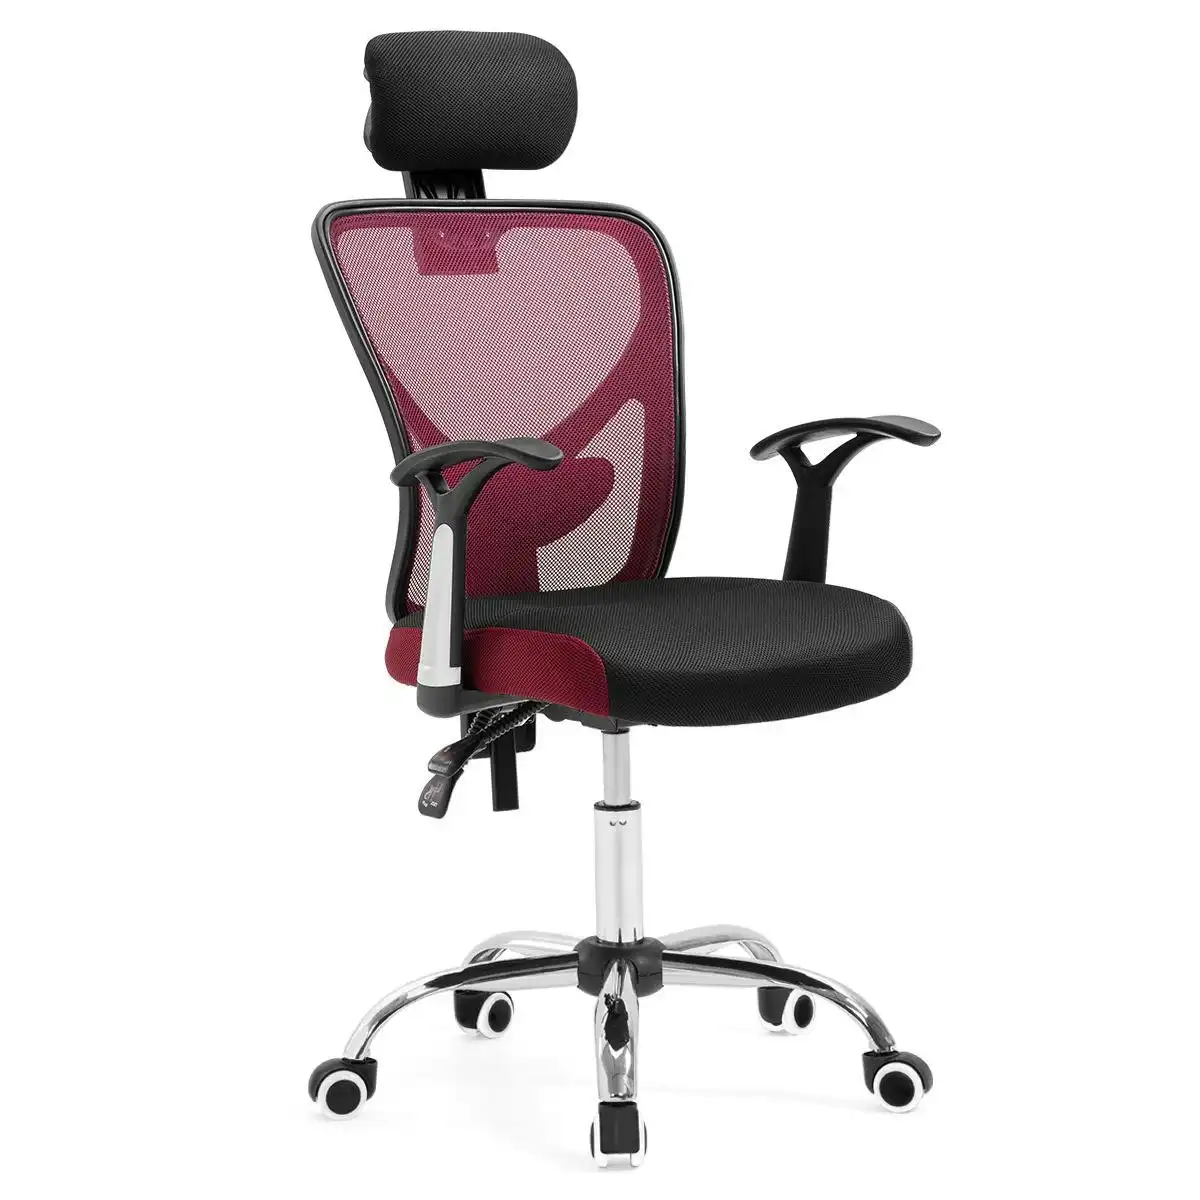 Neader Ergonomic High Back Mesh Office Chair with Back Lumbar Support